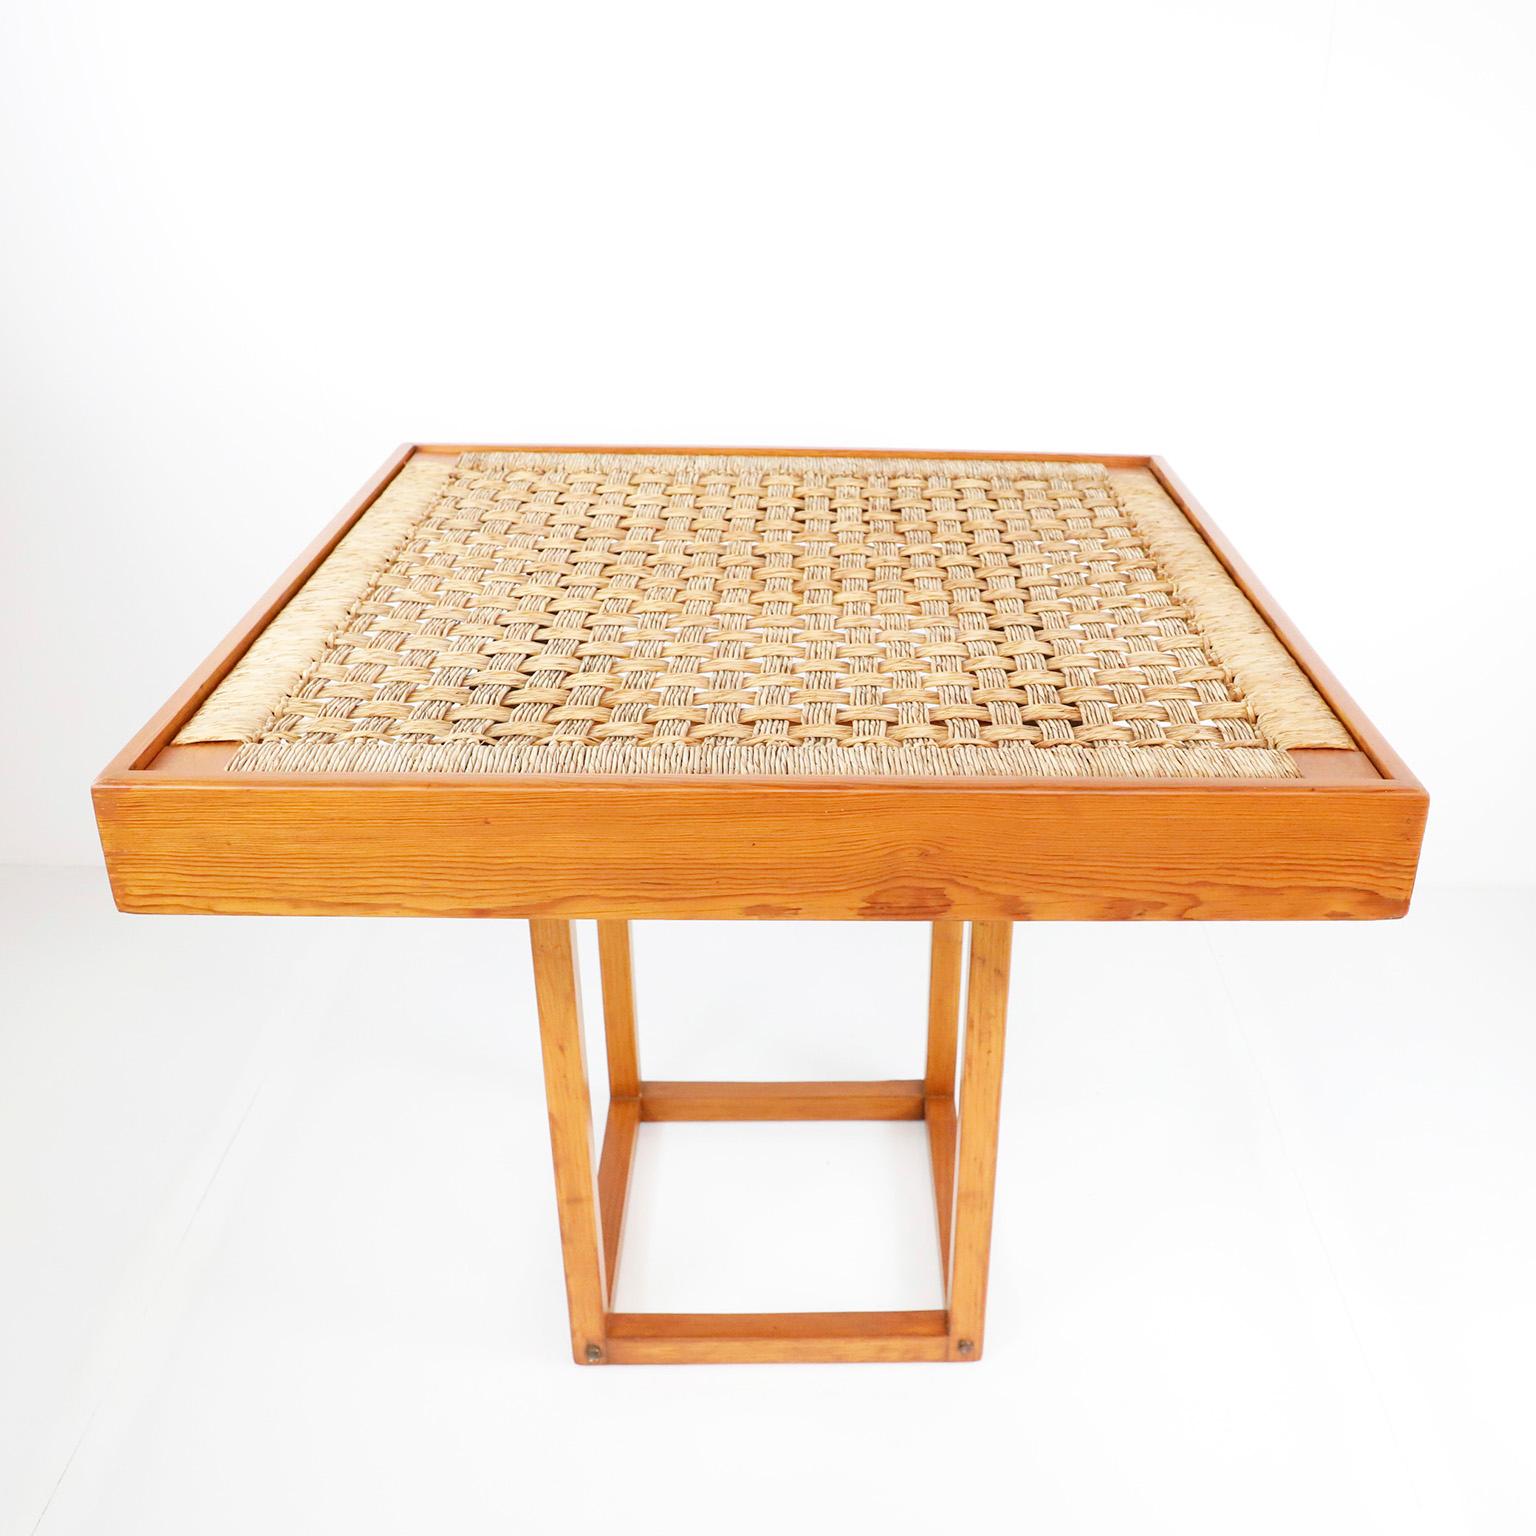 We offer this Dinning Table that can be converted to a coffee table by simply moving the base, in the style of Michael Van Beuren made in pine wood and palm cords, circa 1960. Great vintage conditions.

Note: The table requires a glass but due to